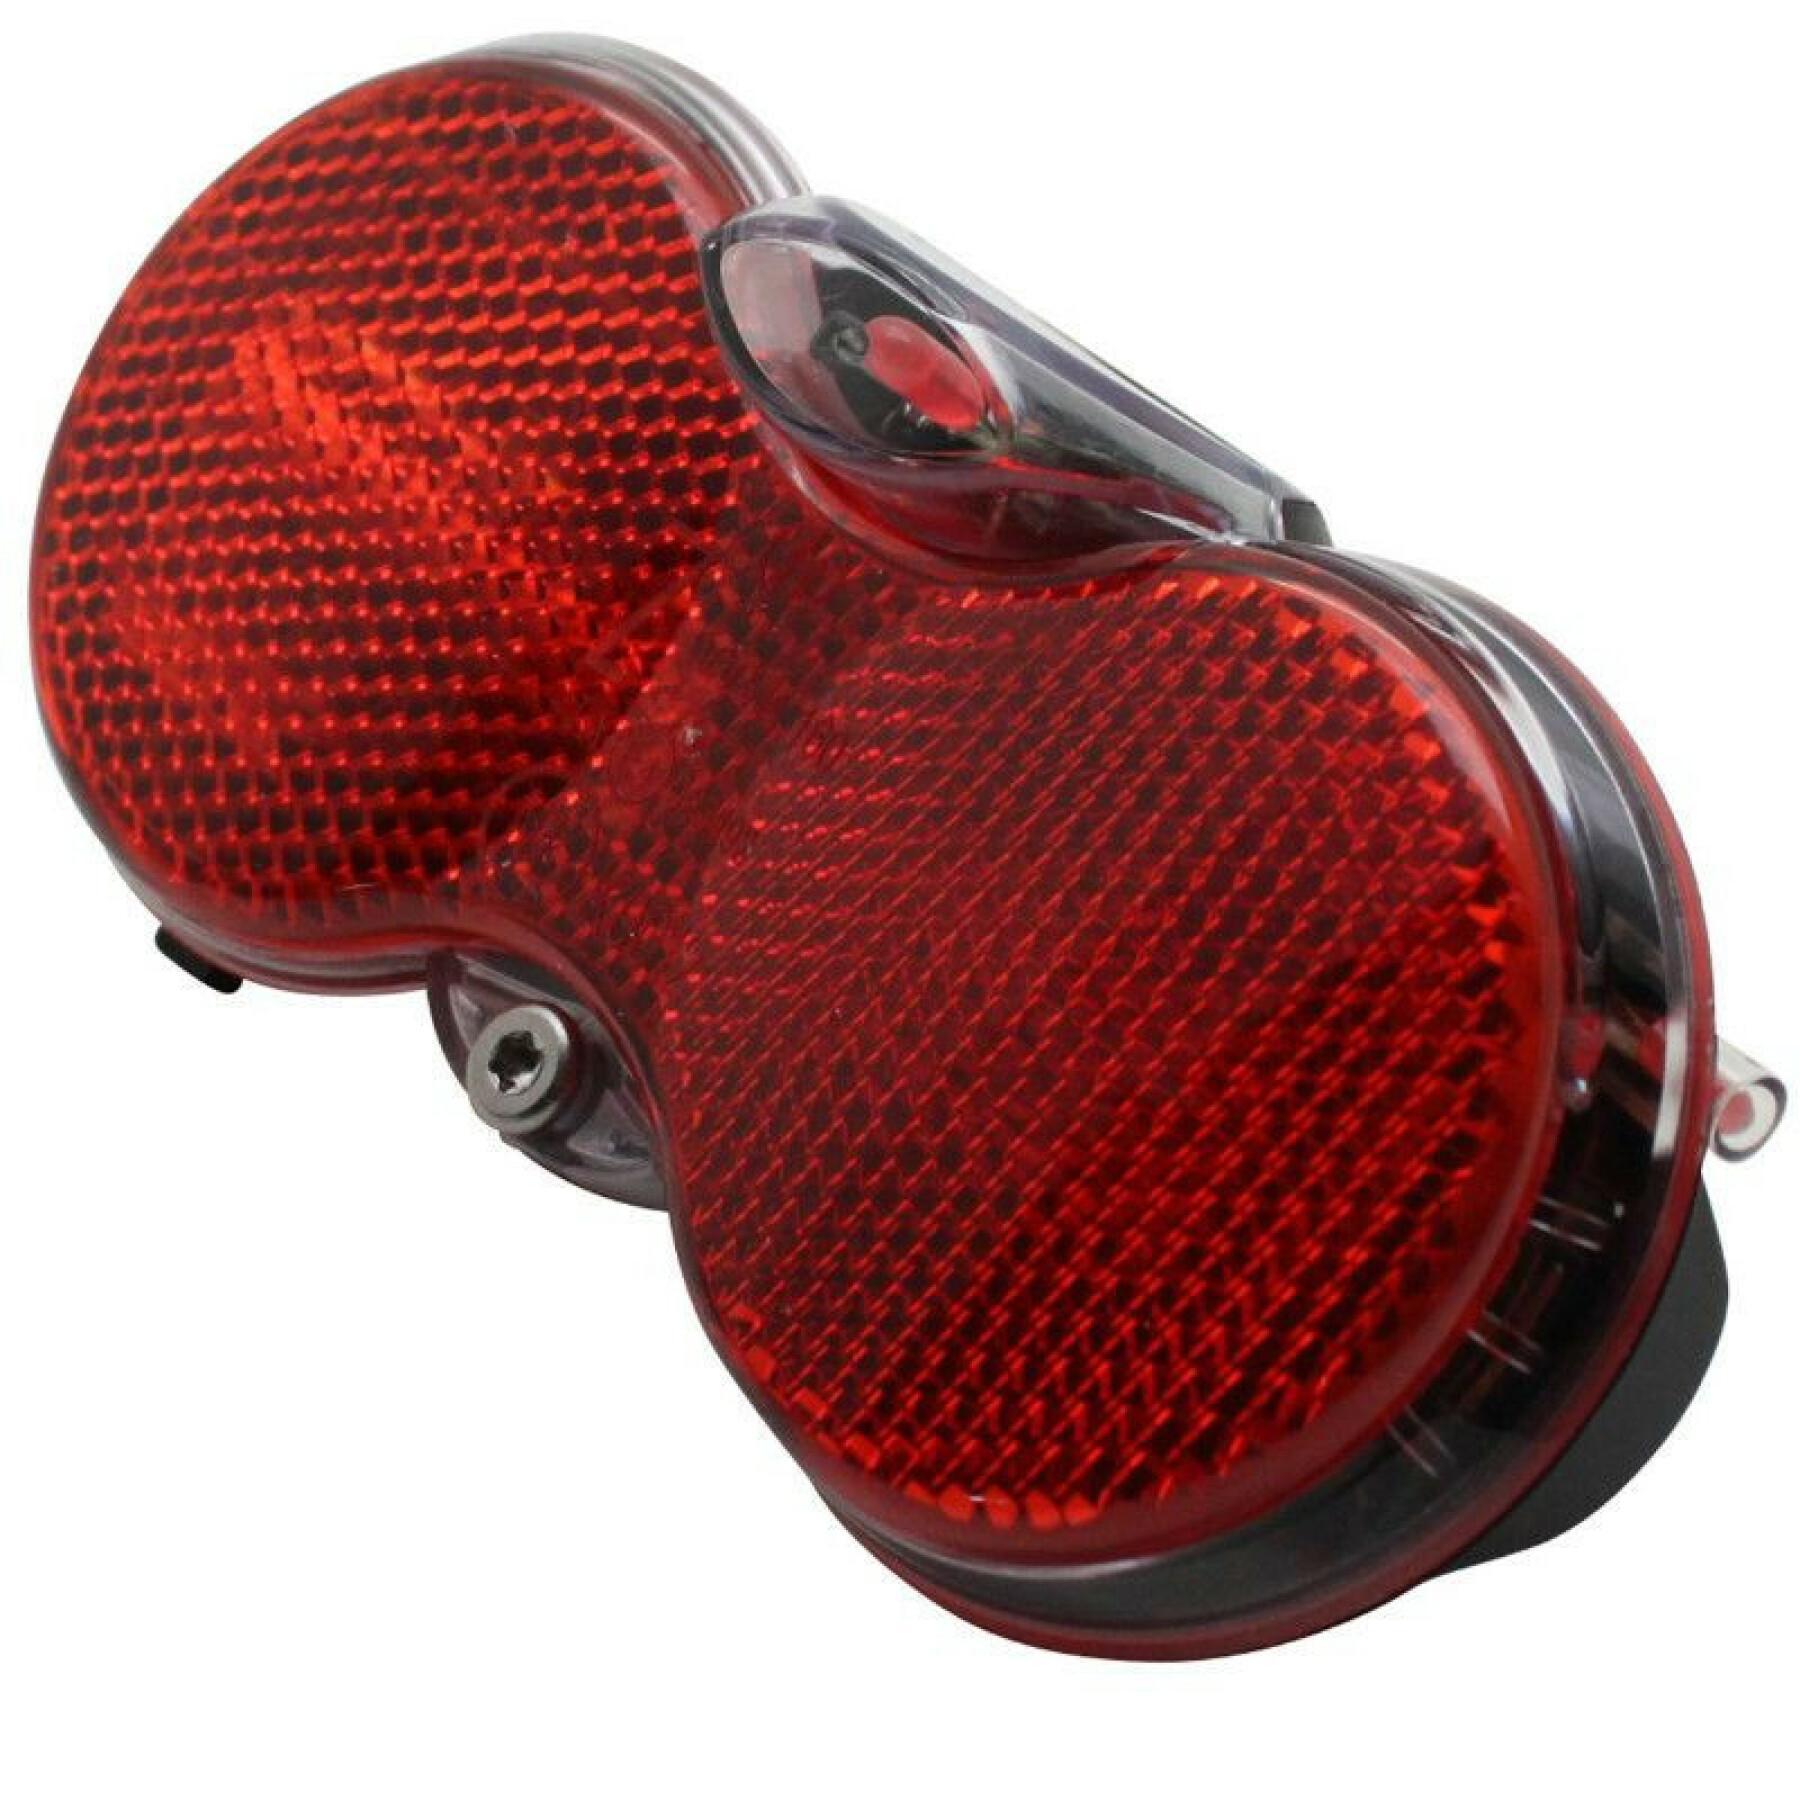 rear battery bike light on luggage rack (on card) - triggers on movement - delivered with 1 aaa battery Herrmans Goggle Xi